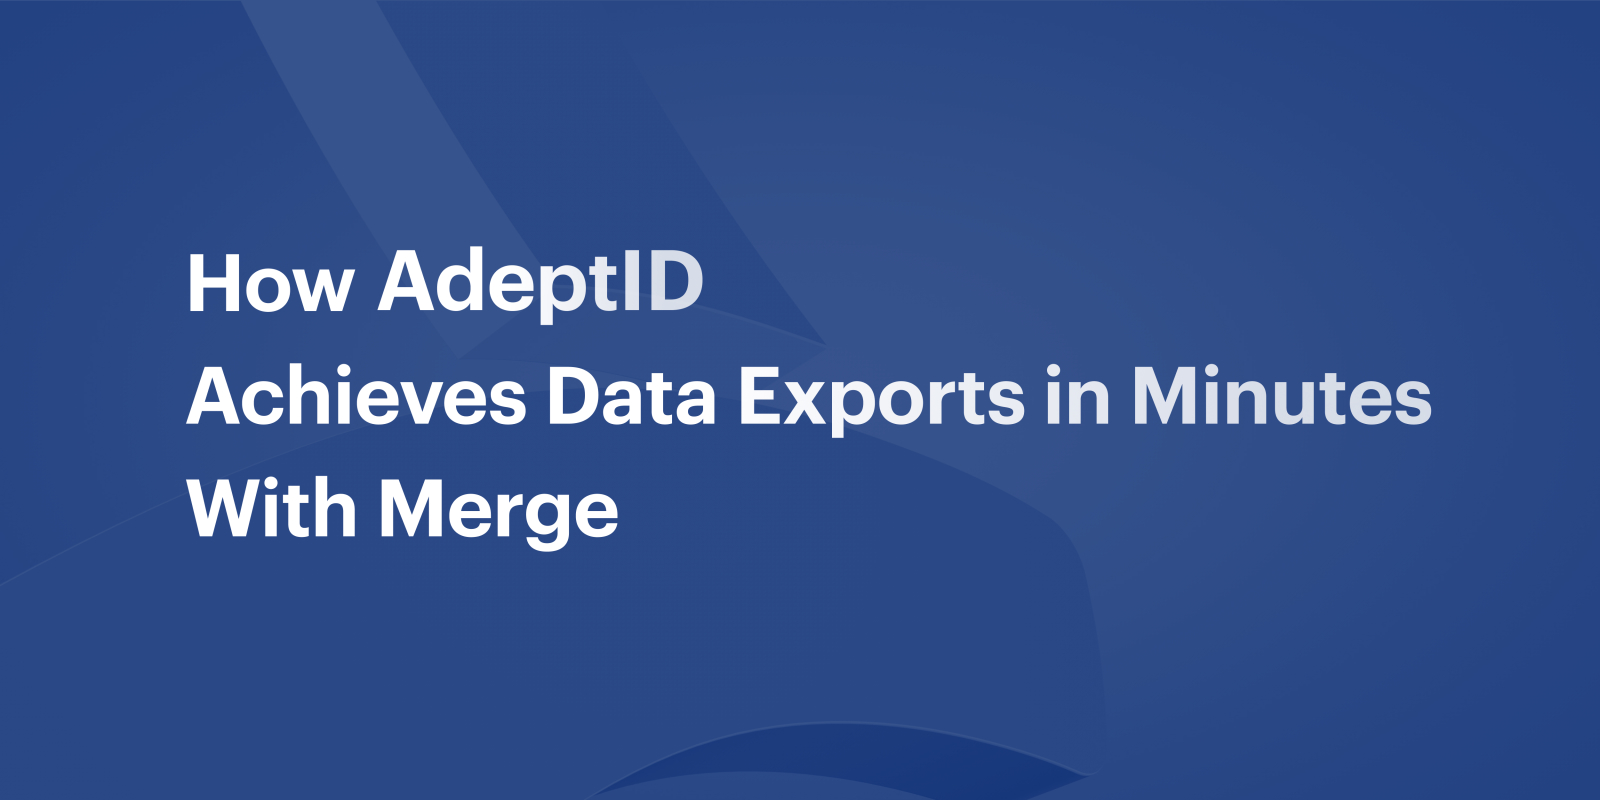 How AdeptID Achieves Data Exports in Minutes With Merge